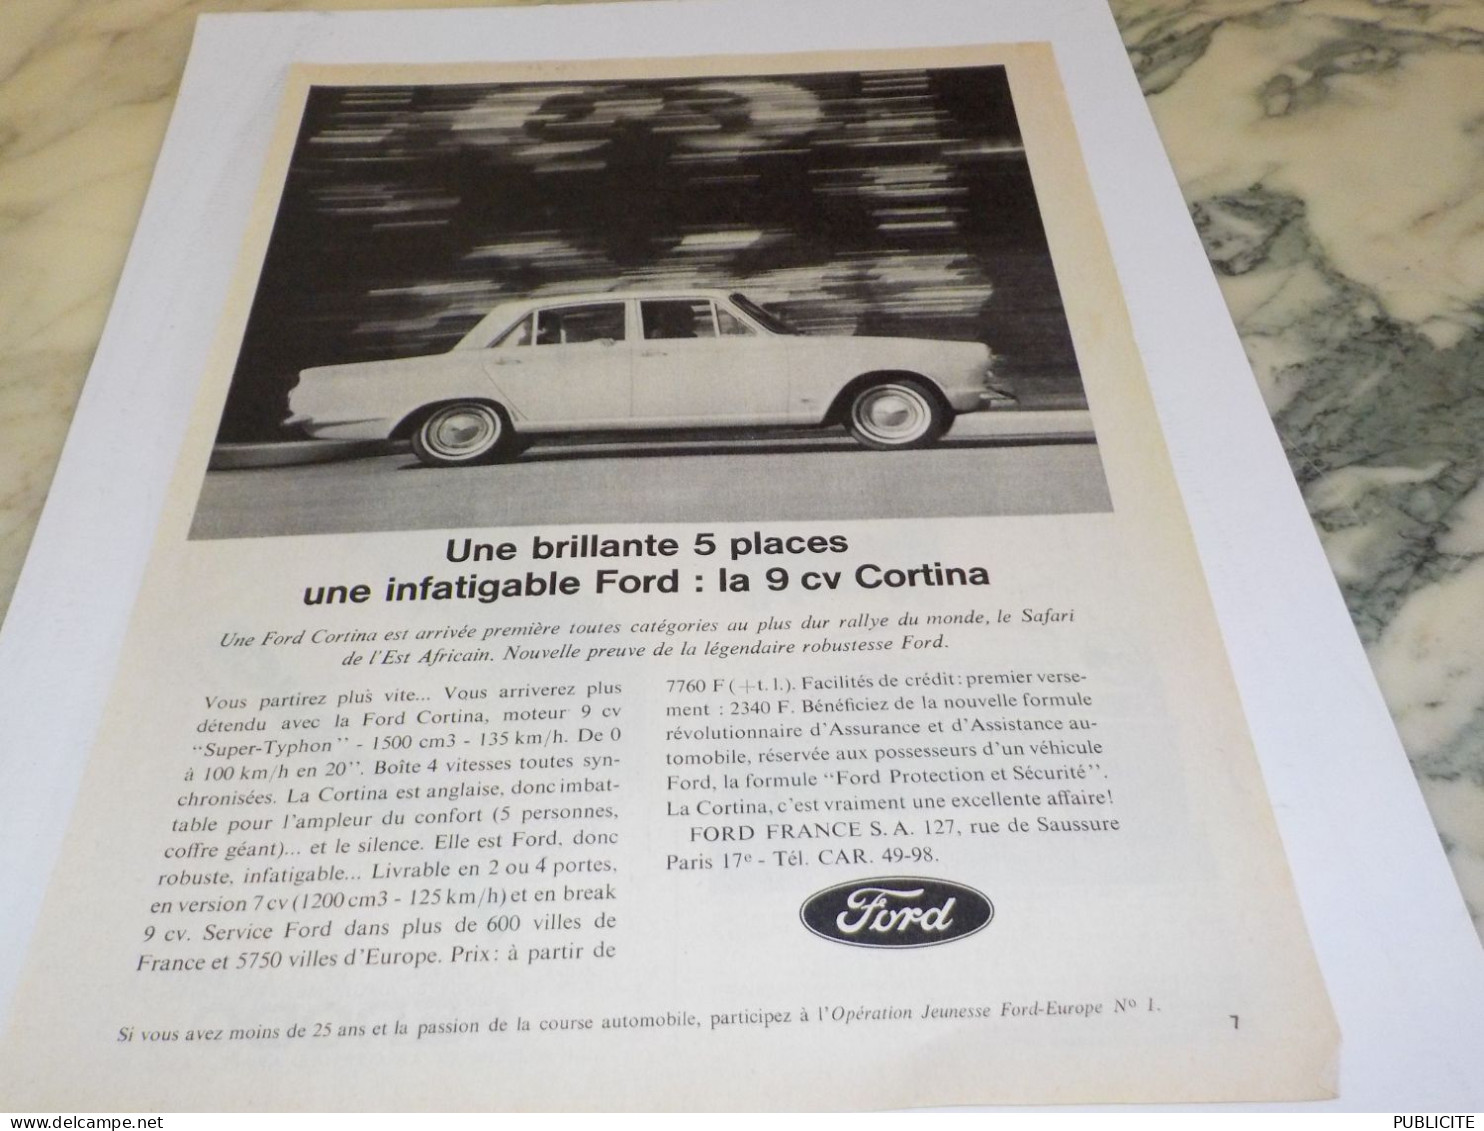 ANCIENNE PUBLICITE VOITURE FORD CORTINA 1964 - Voitures